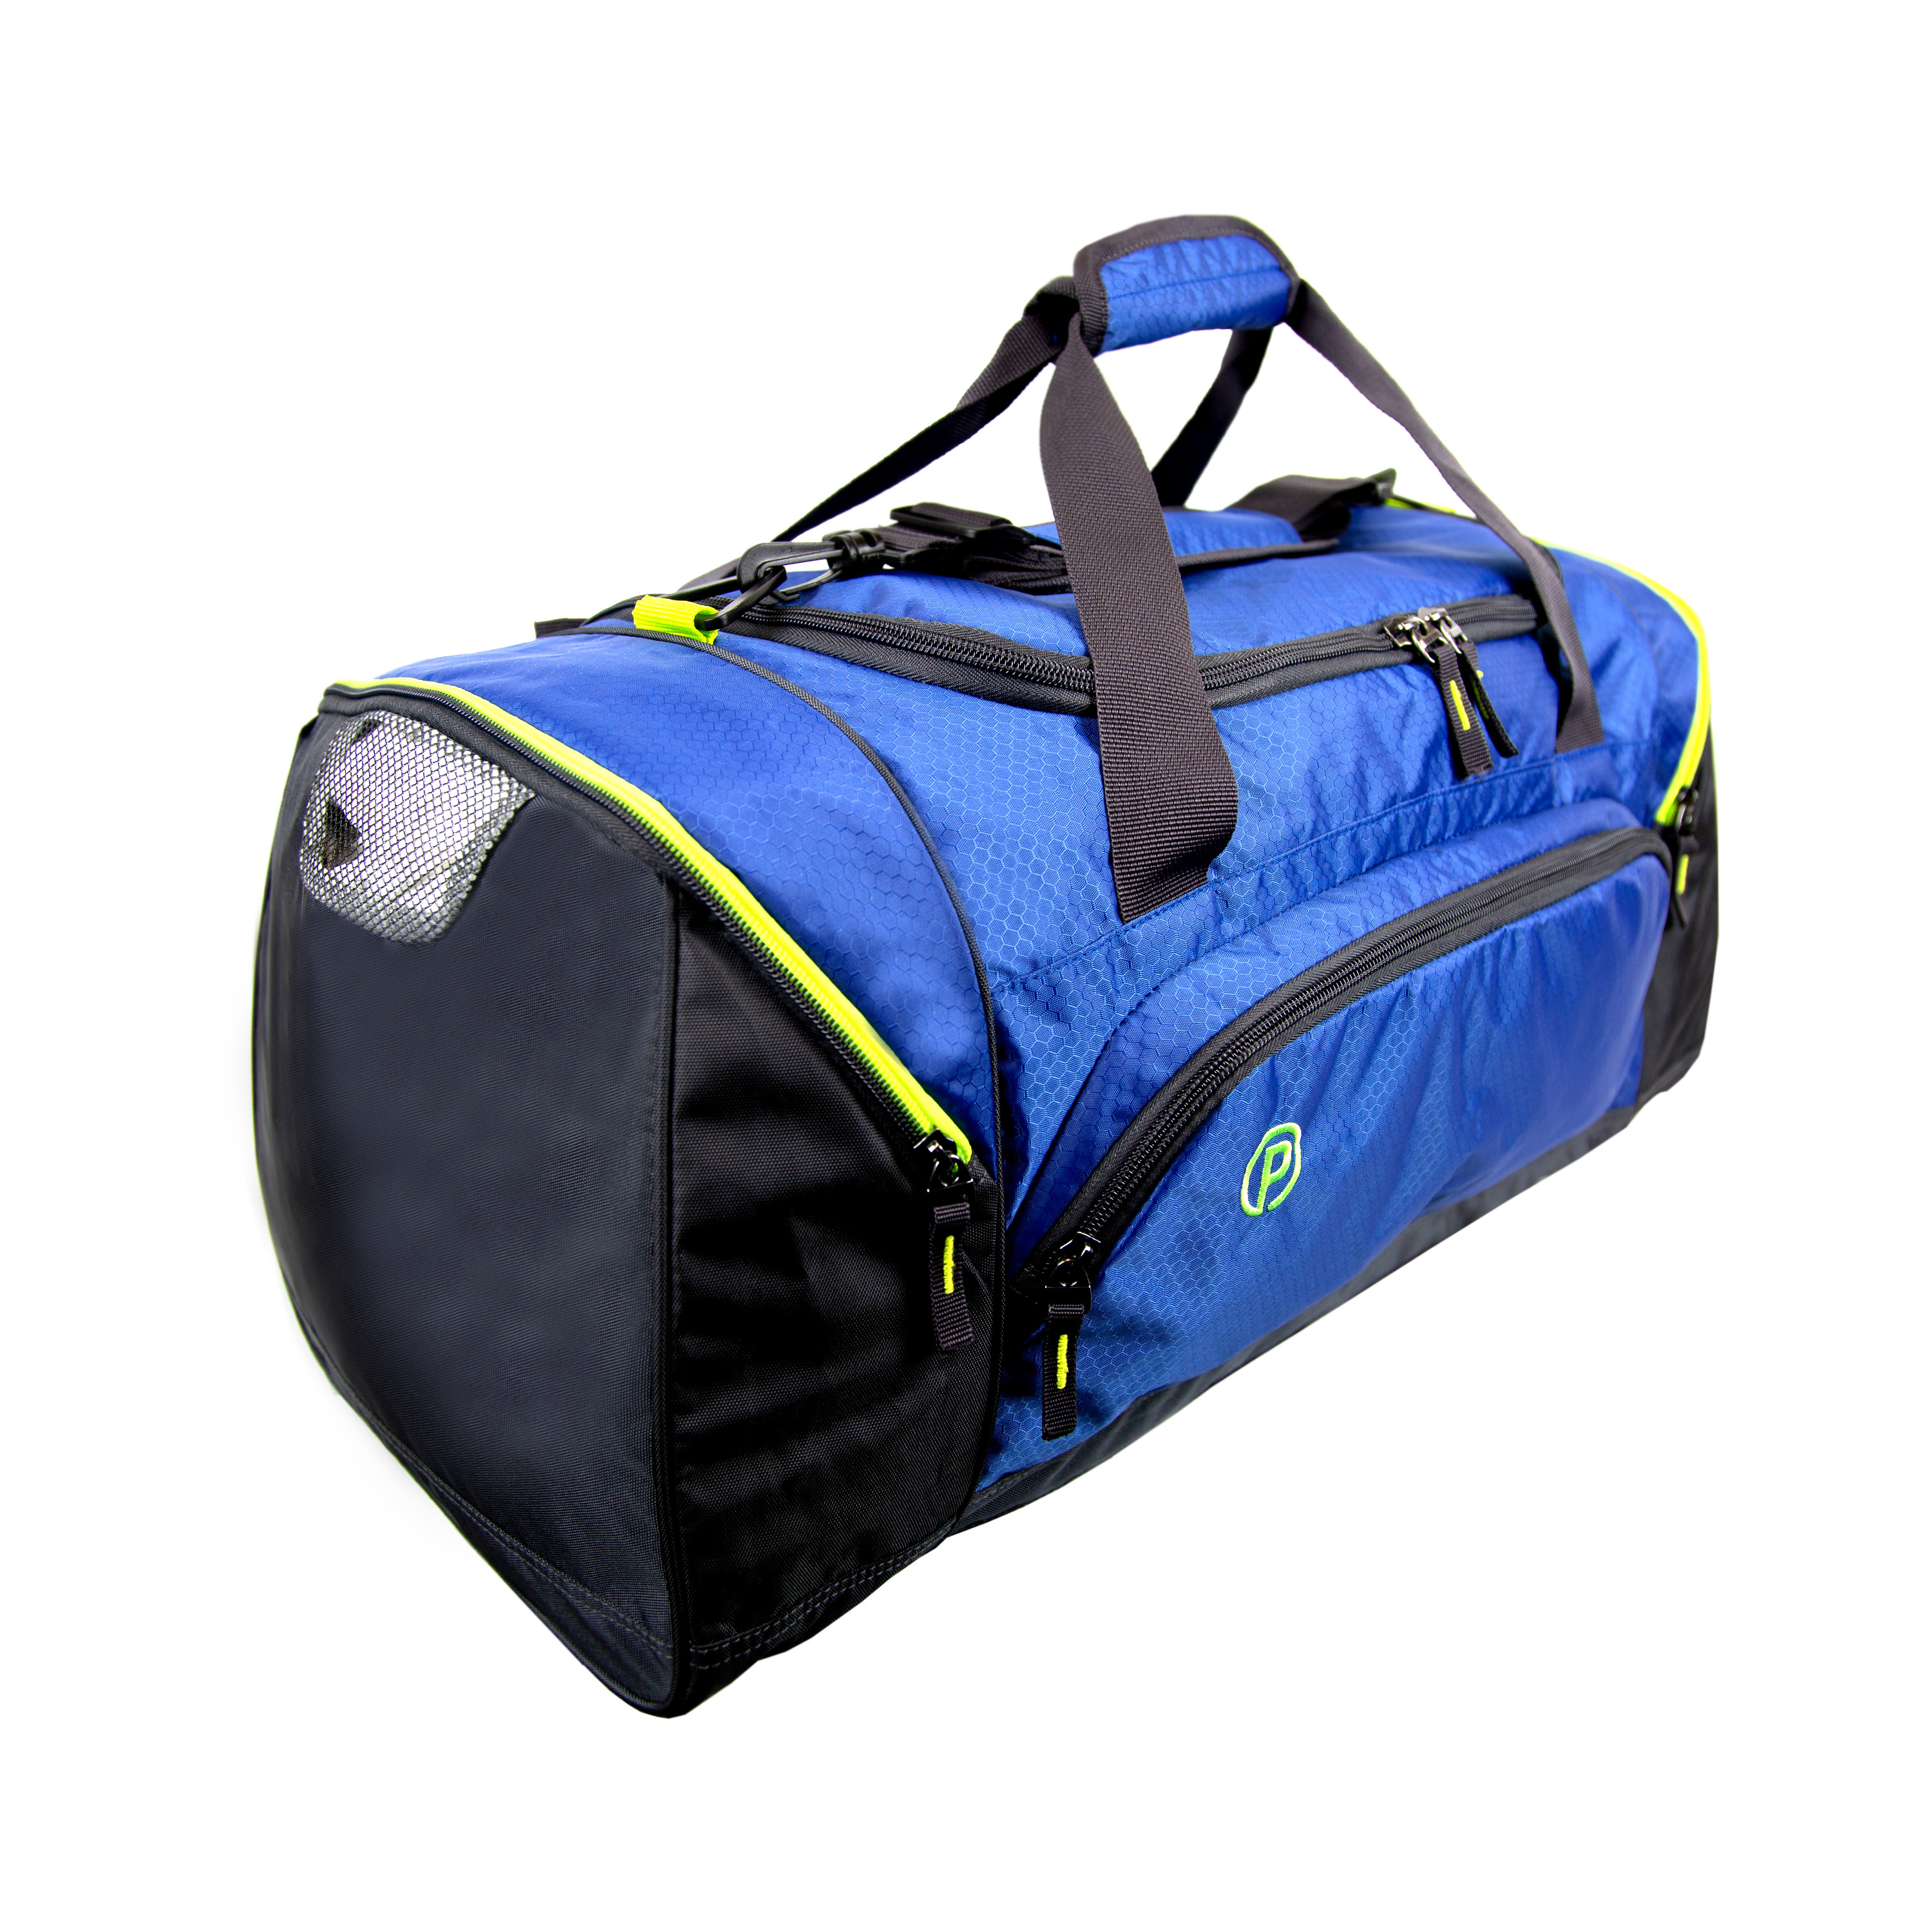 Protege Unisex 24" Solid Duffel Bag Perfect for Multi-Day Travel, Blue - image 2 of 6